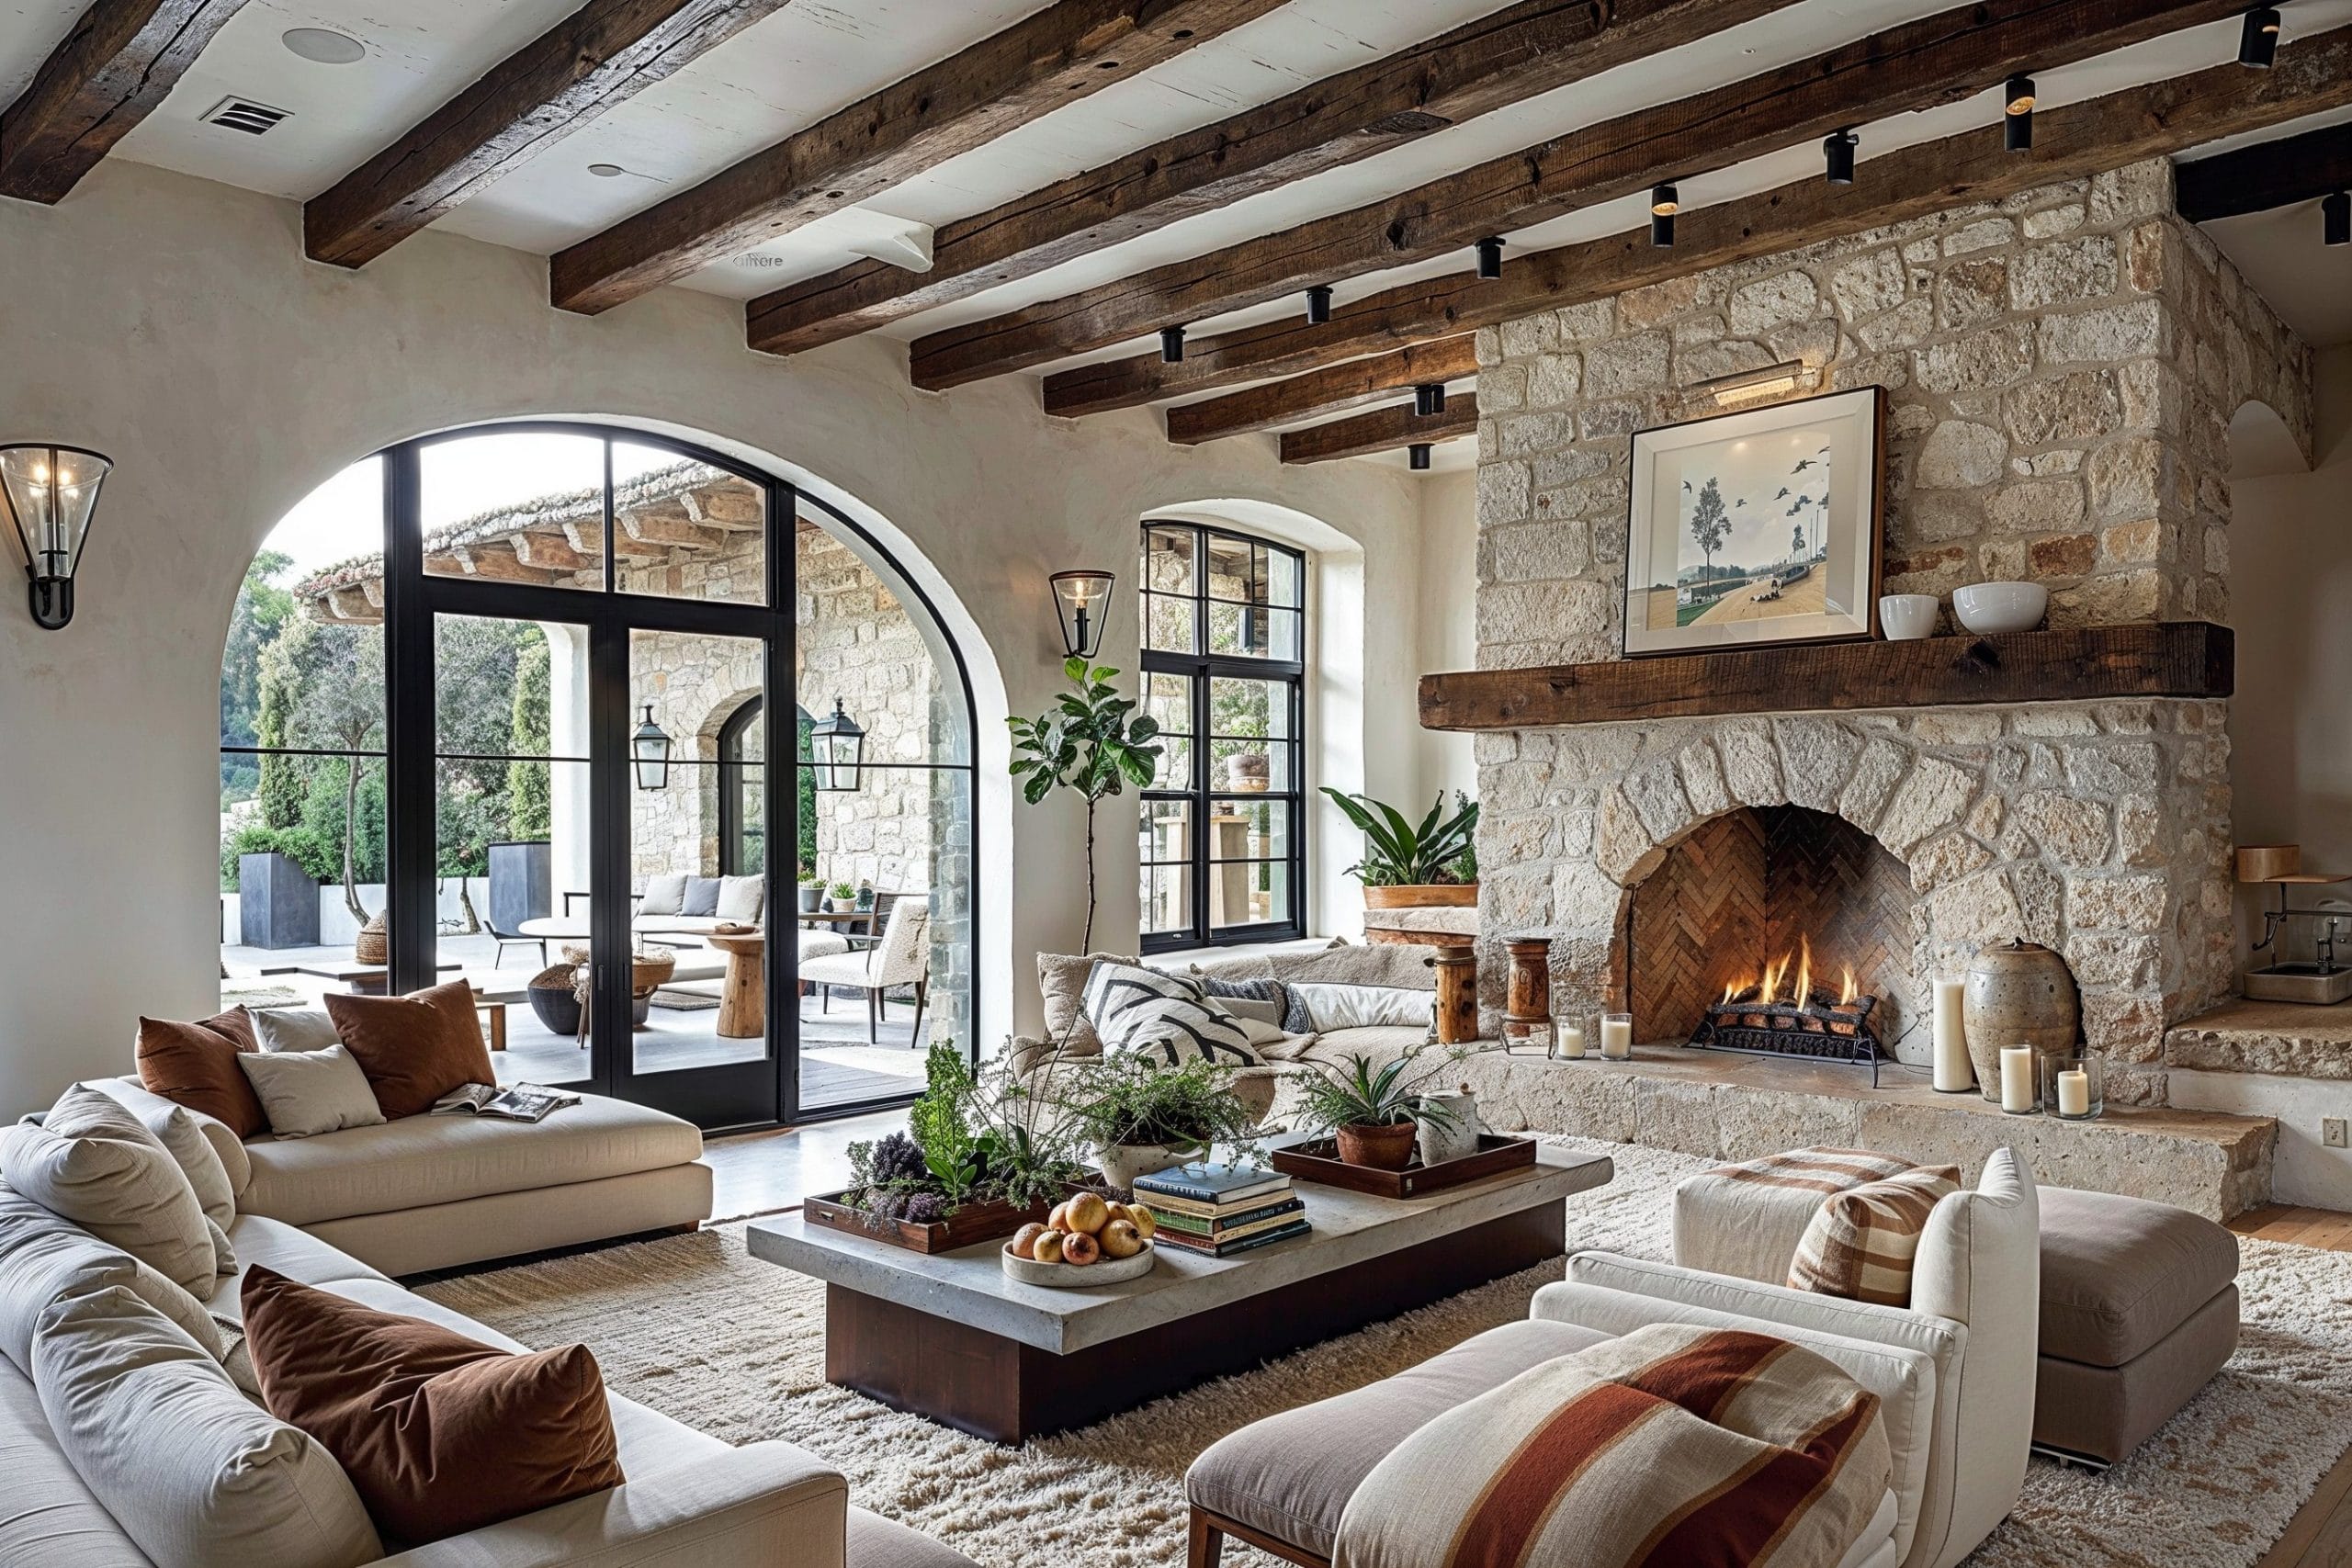 Spanish Modern Interior Design: How to Blend Traditional Warmth with Contemporary Flair